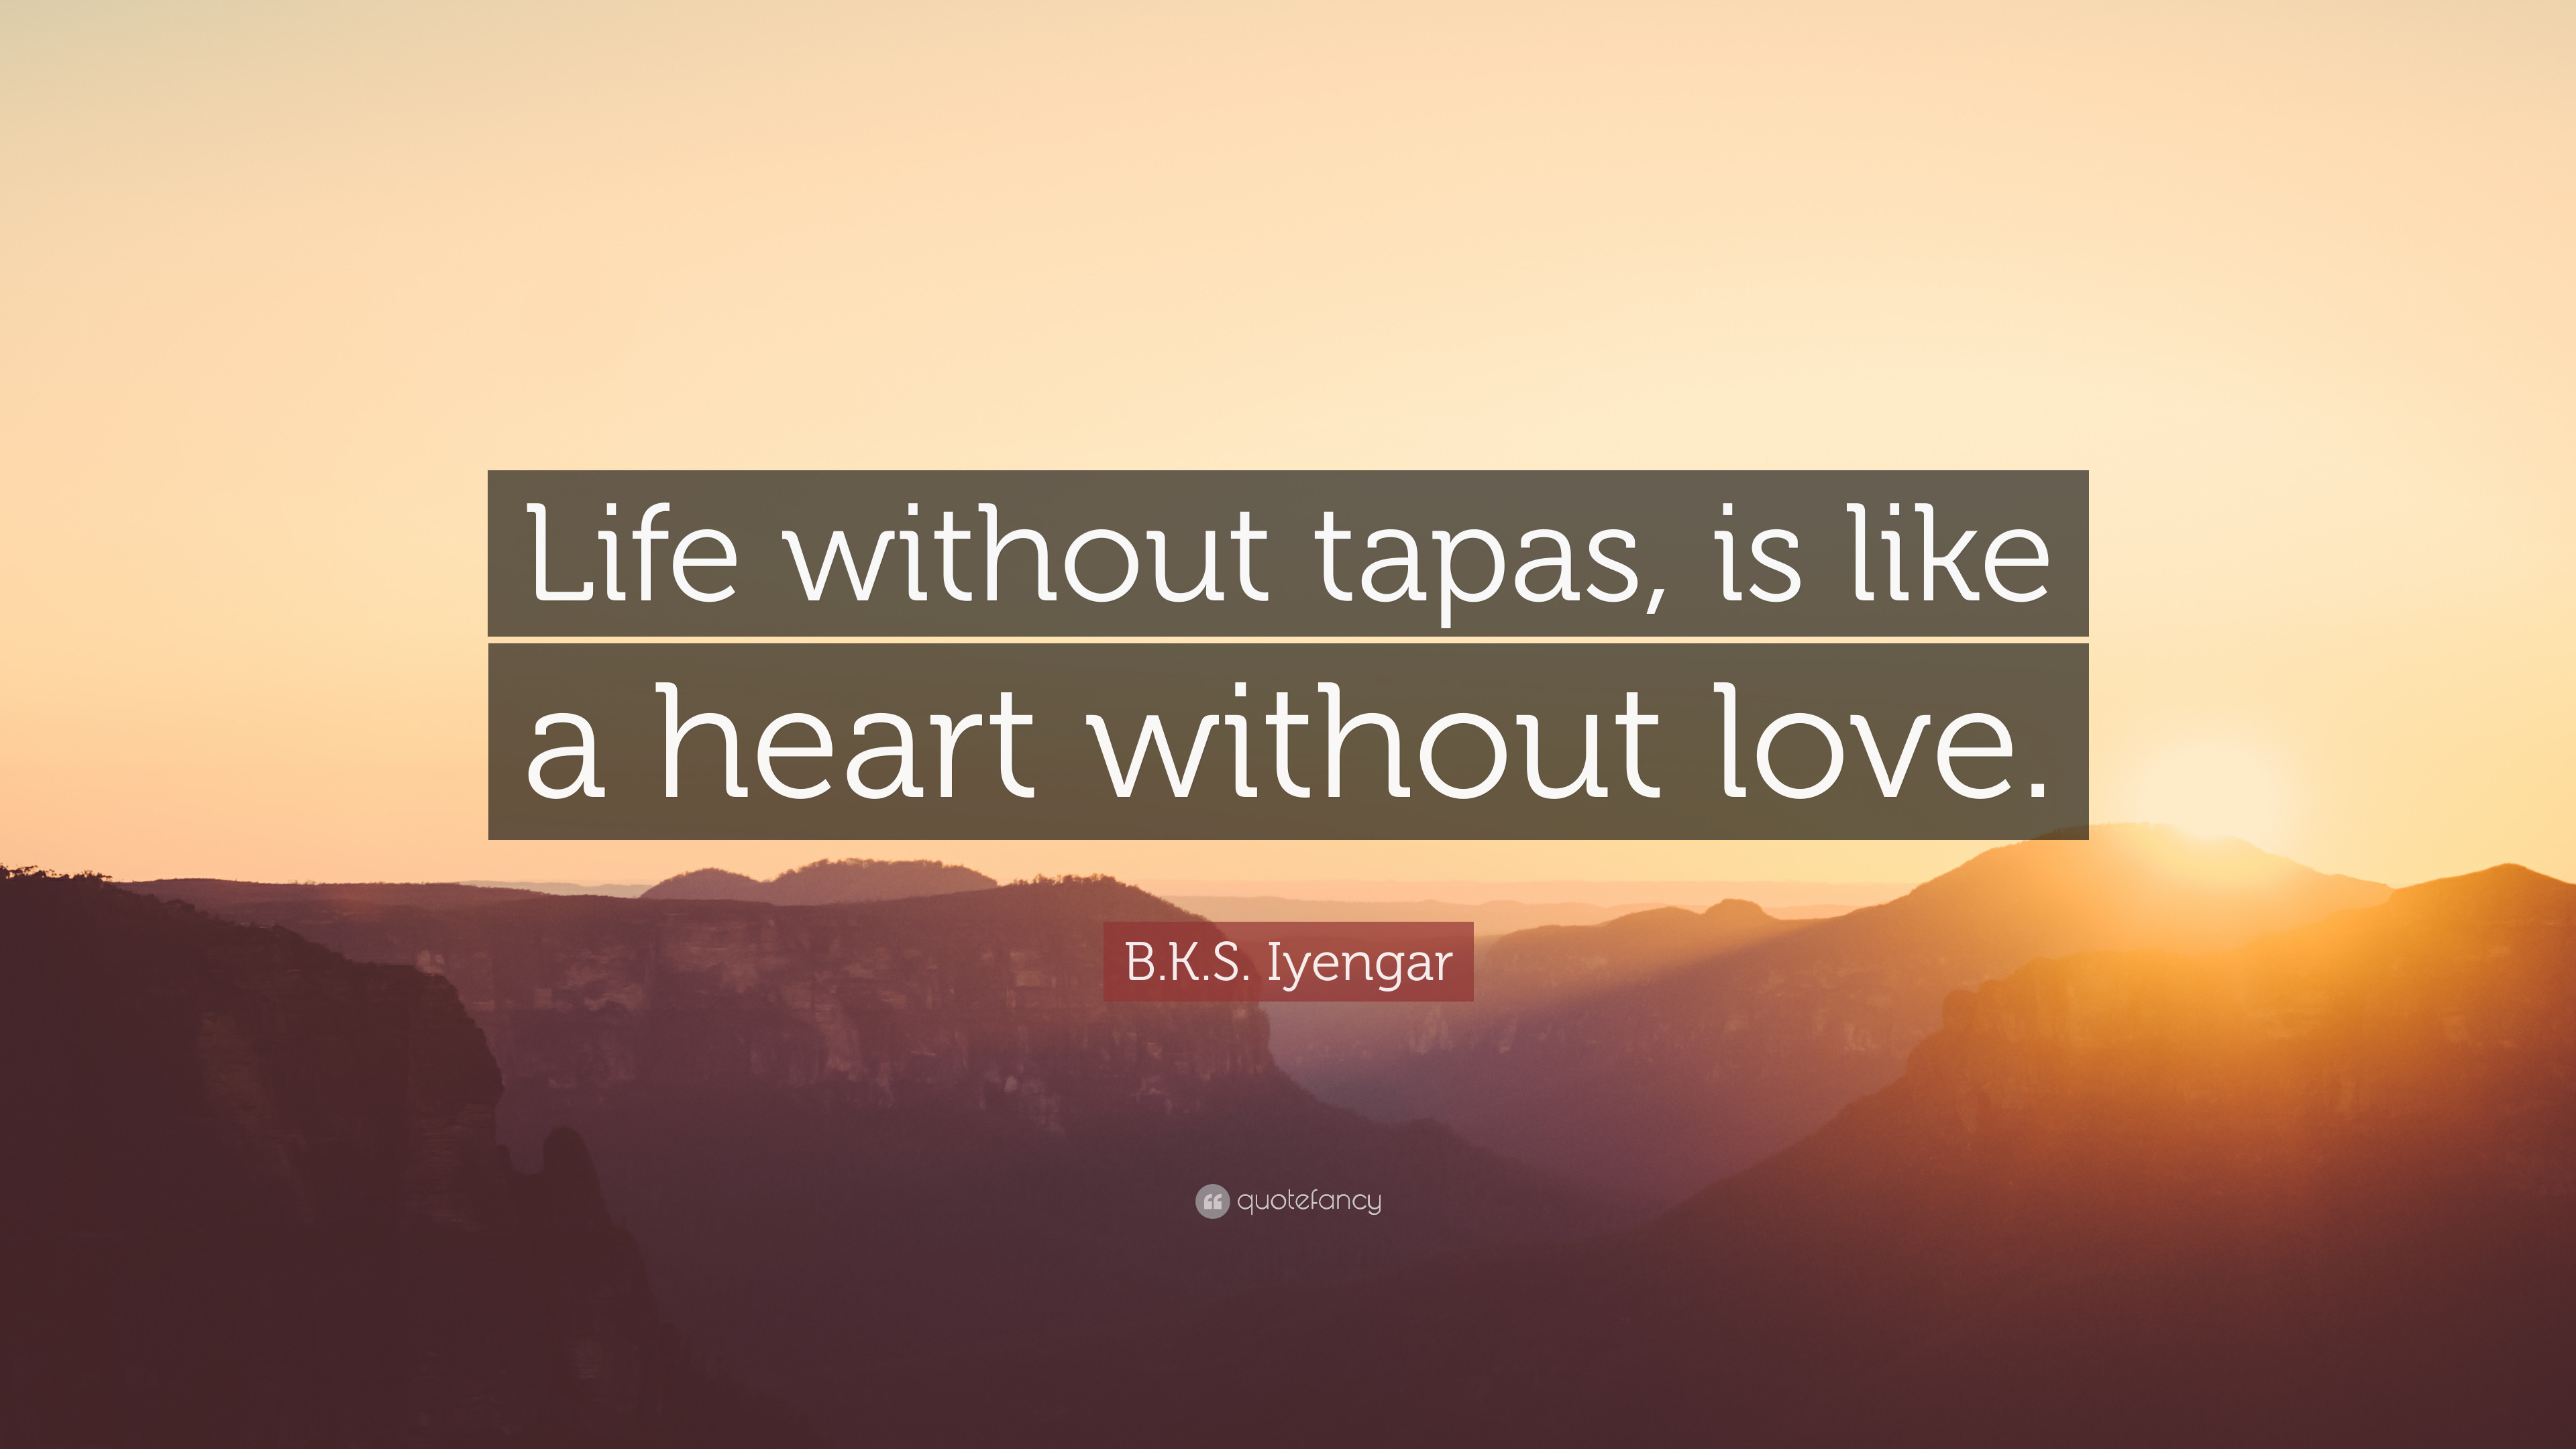 B K S Iyengar Quotes Light On Life
 B K S Iyengar Quote “Life without tapas is like a heart